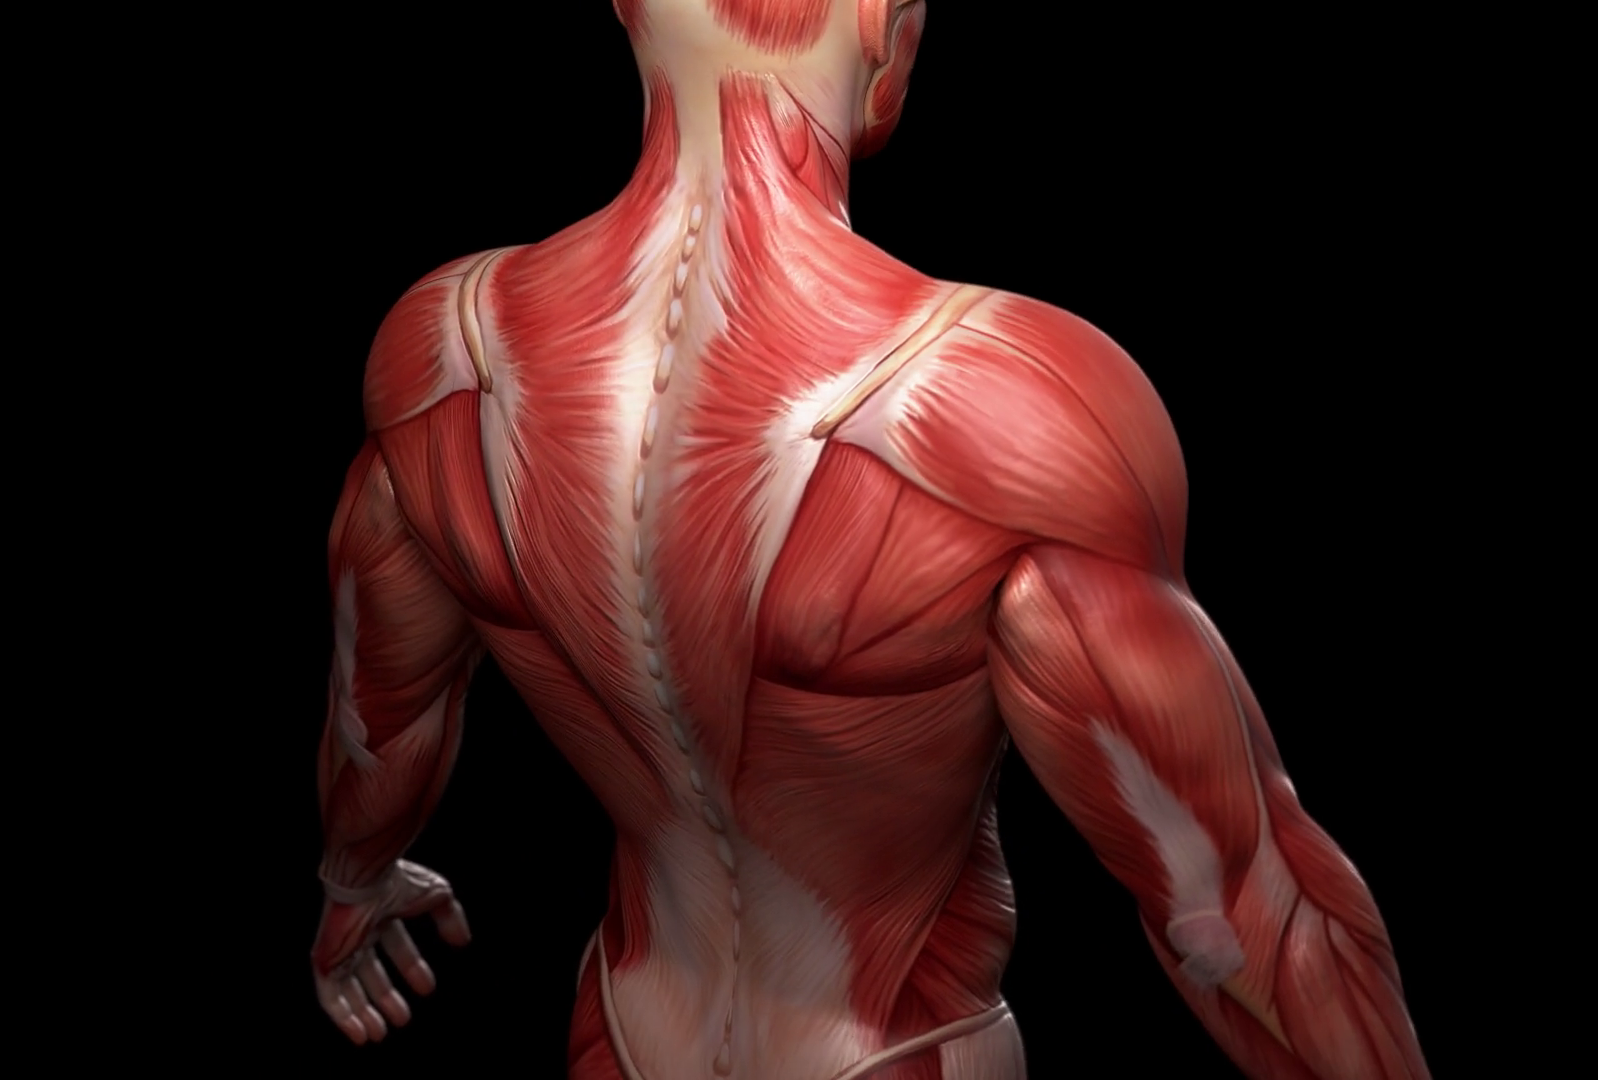 How Close to 20/20 Can You Get on This General Knowledge Test? muscular system